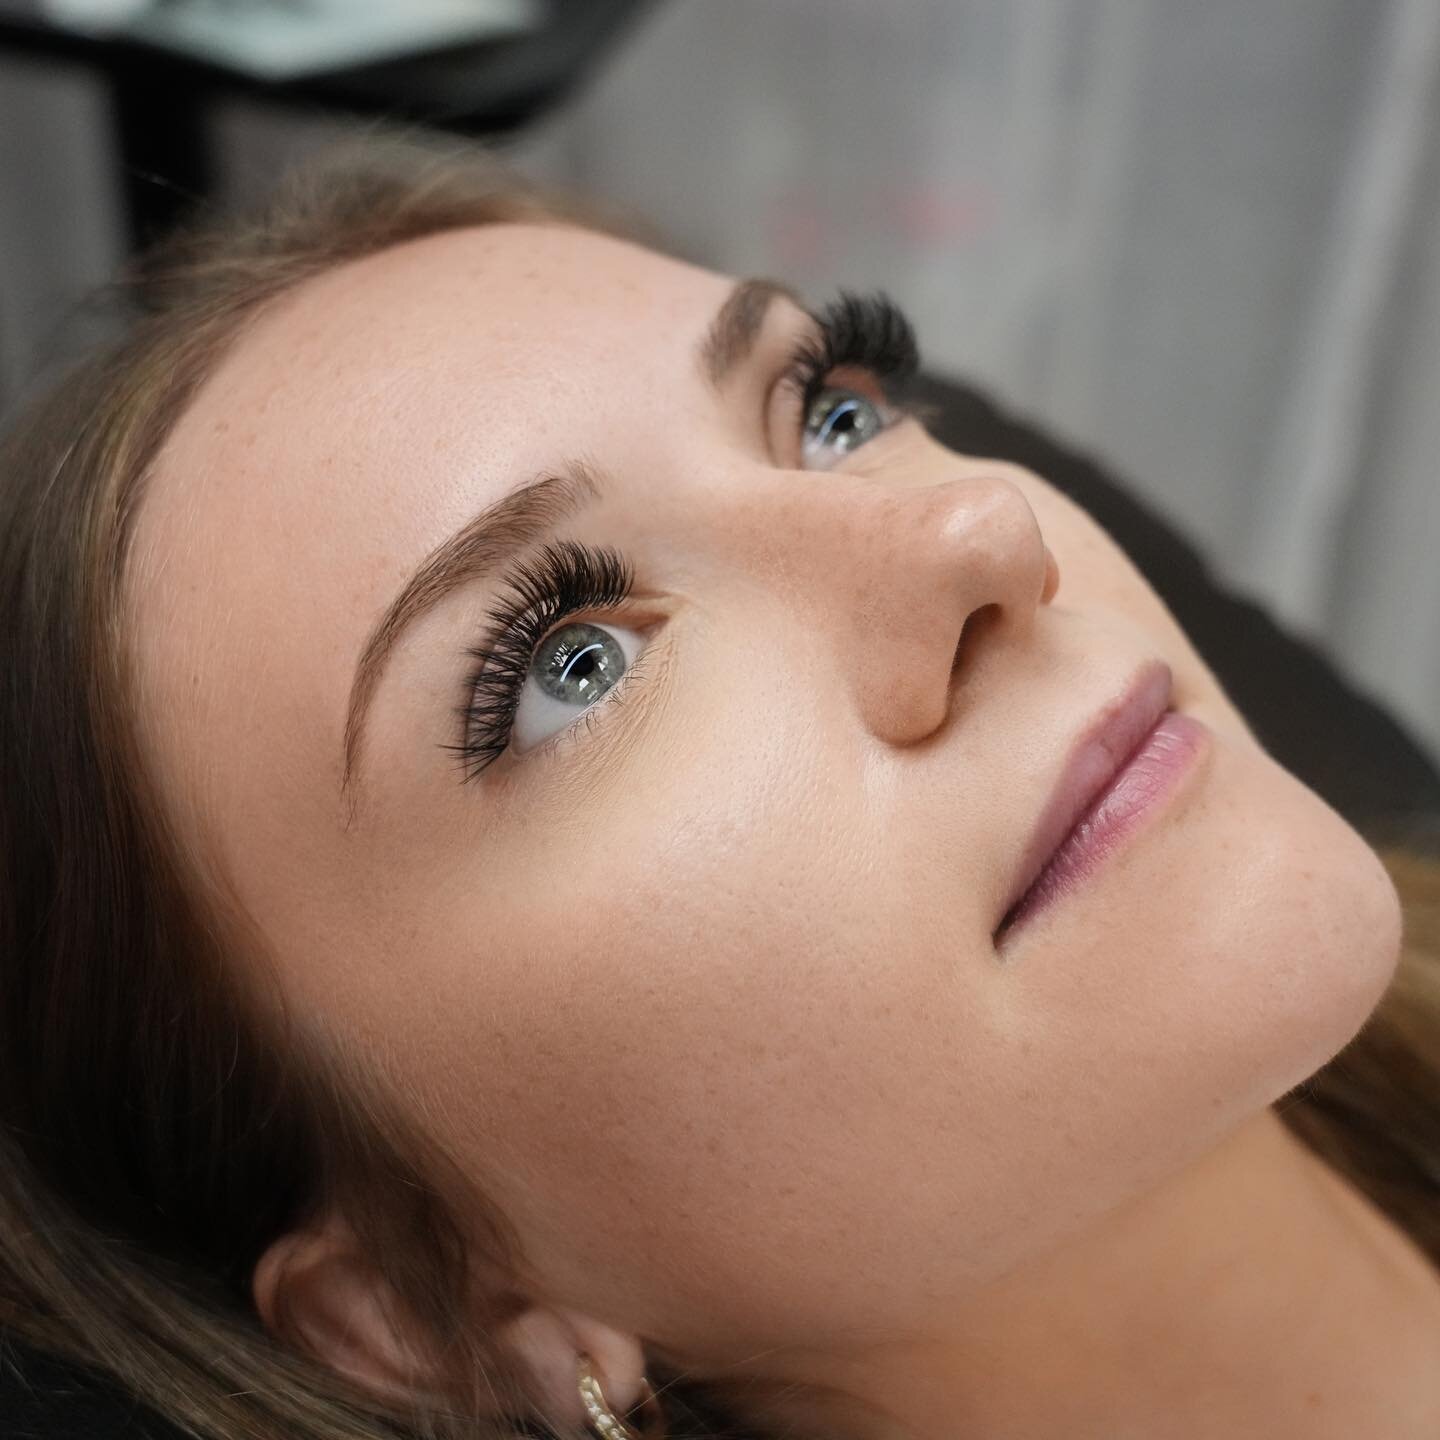 Custom wispy eye styling on a longtime client💗 These lashes compliment her eyes and features so well😍 zoom in for allllll the details! 

We pride ourselves on not only having the best quality lashes, but the best eye design for YOUR eyes.

To book 